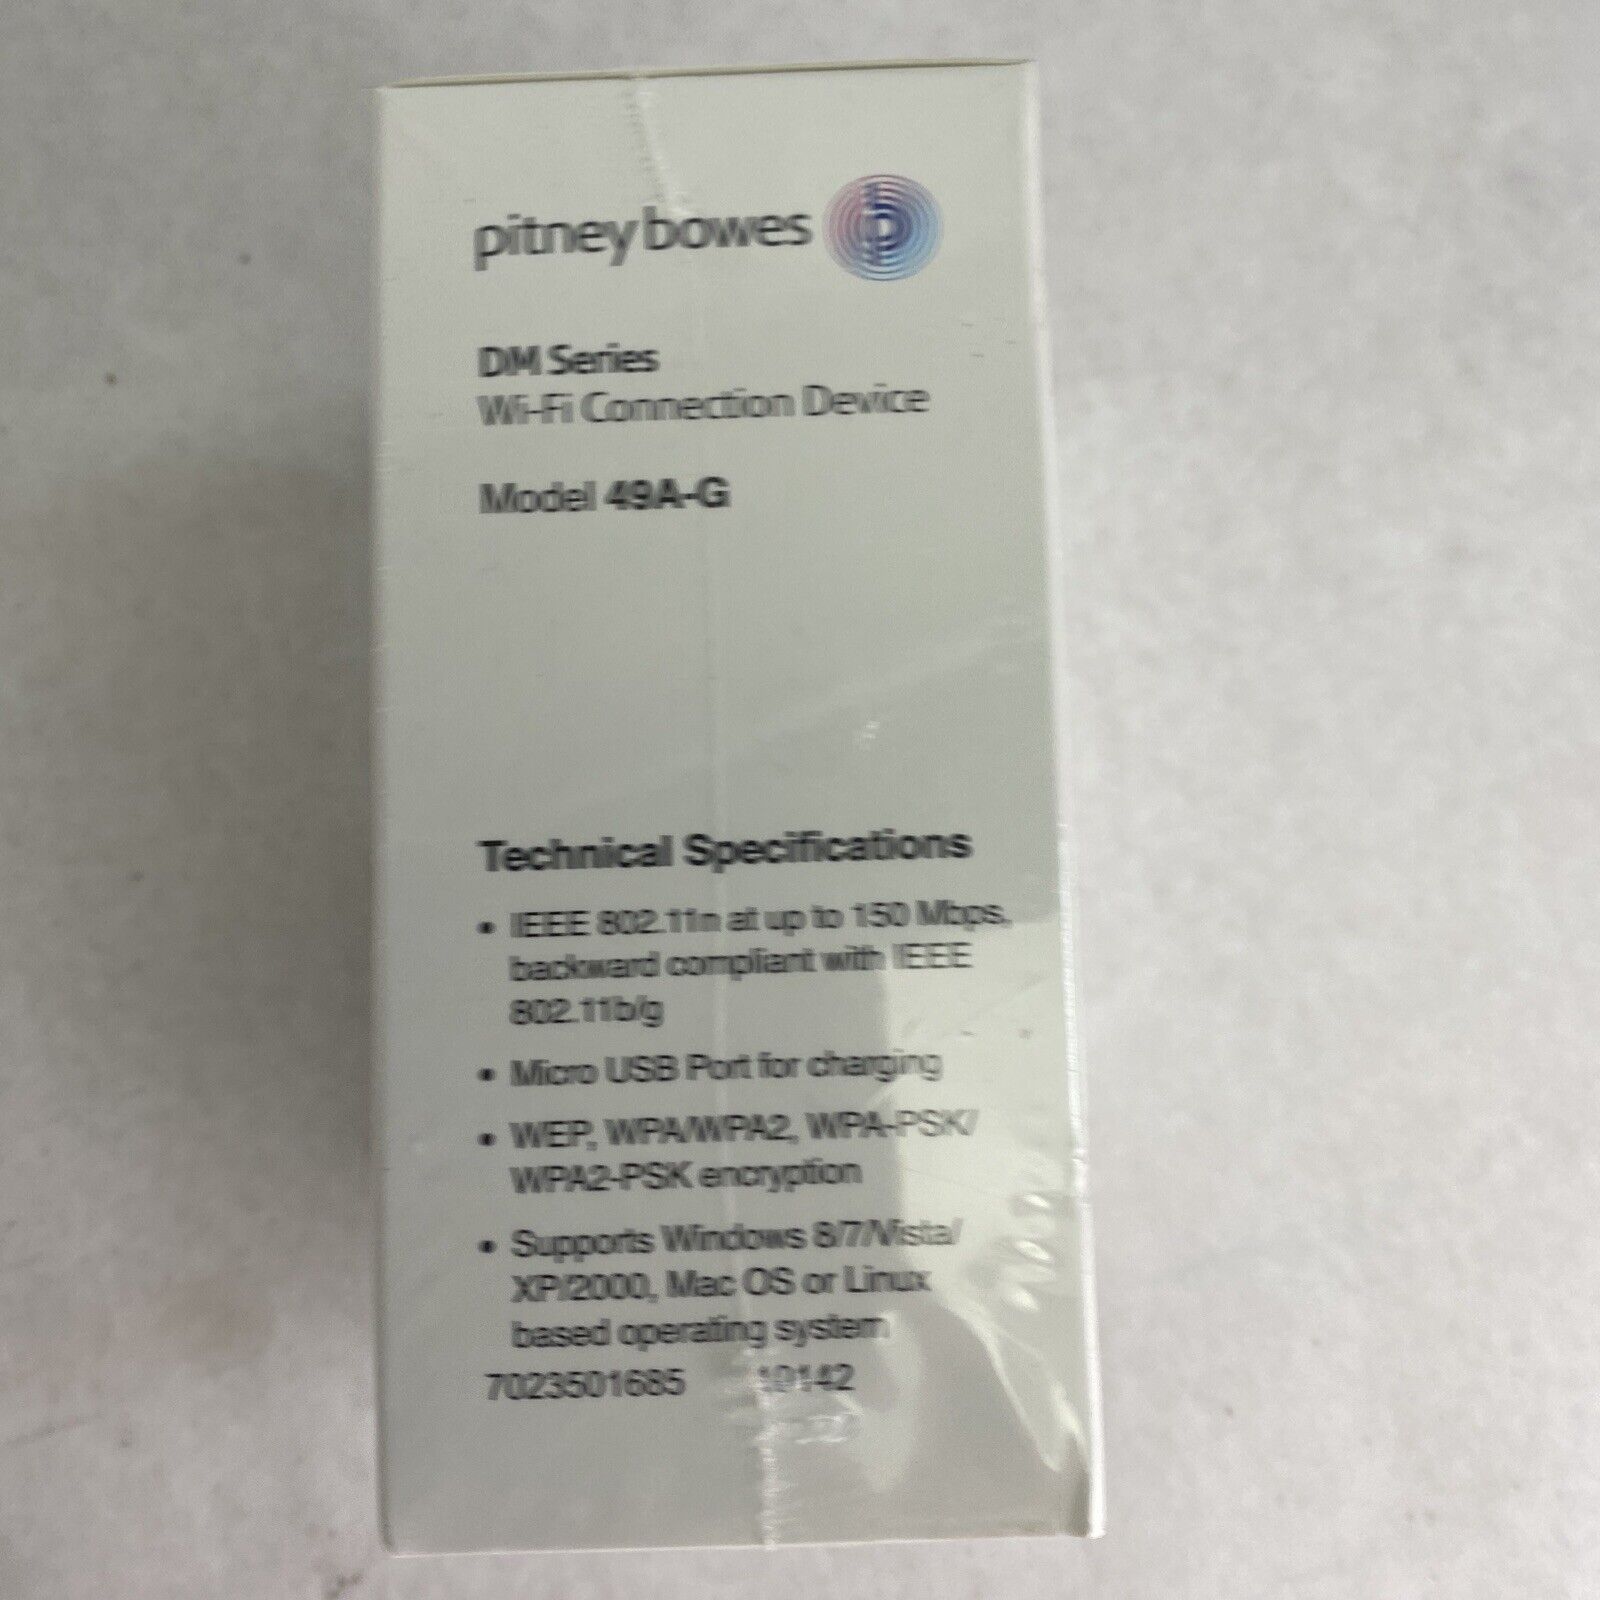 Pitney Bowes 49A-G Wi-Fi Connection Device DM Series SEALED